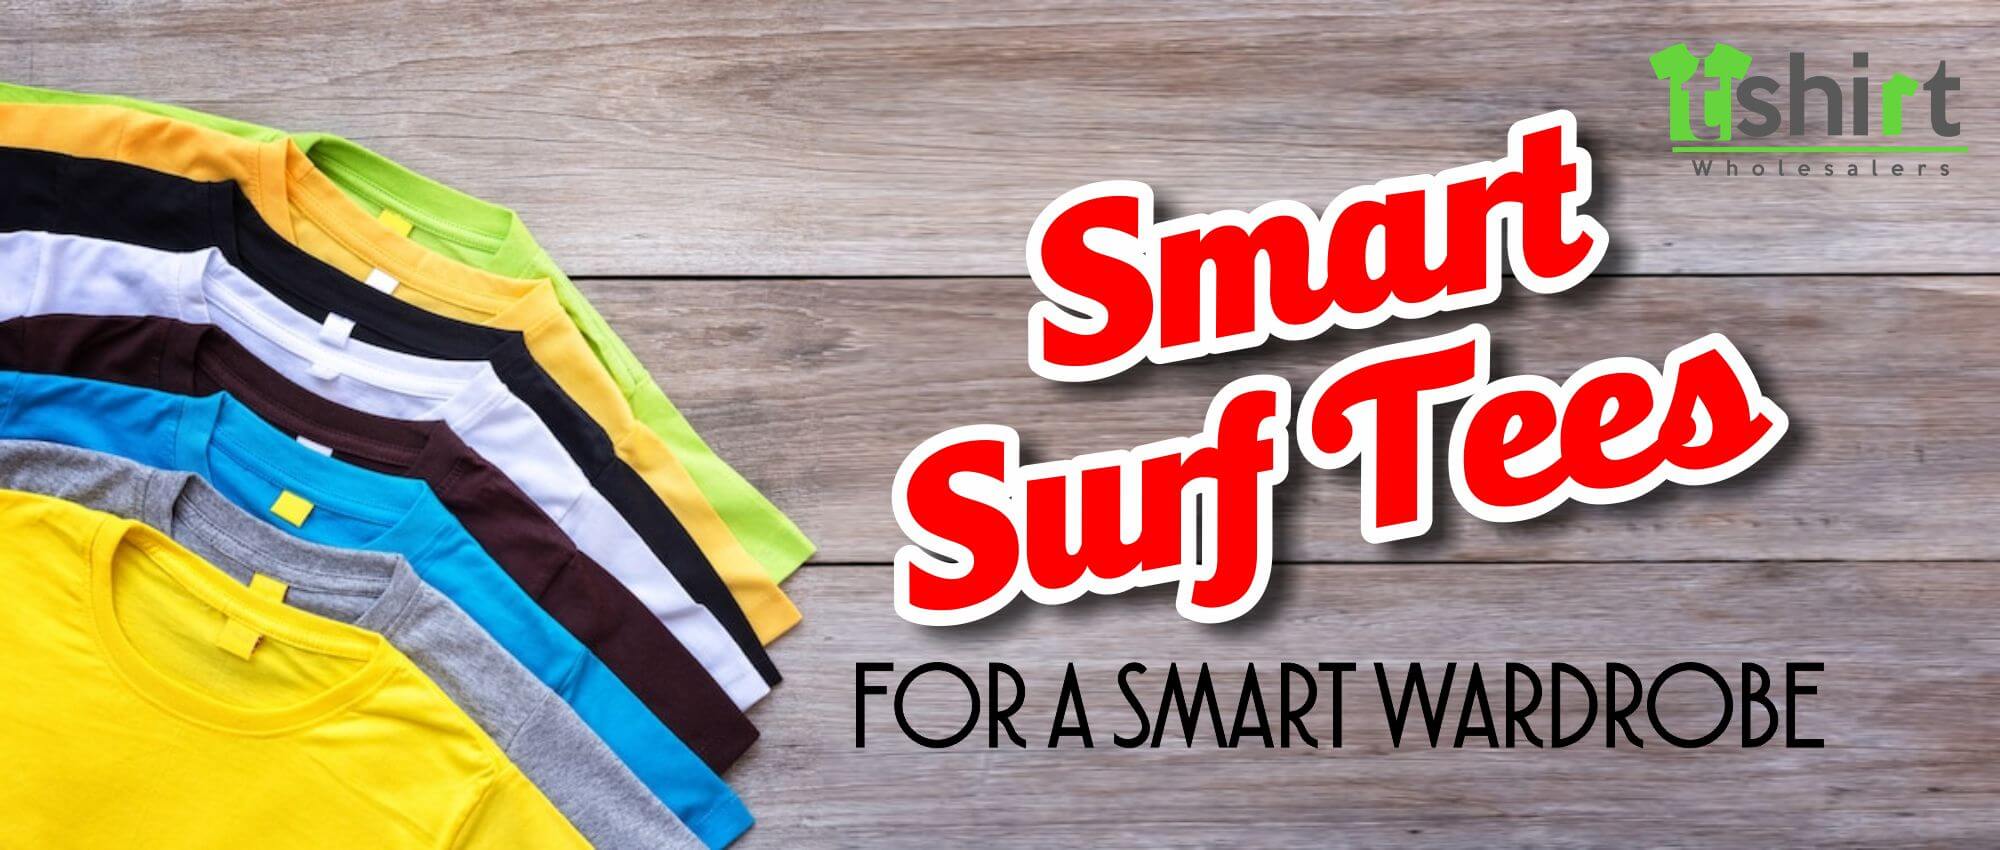 SMART SURF TEES FOR A SMART WARDROBE